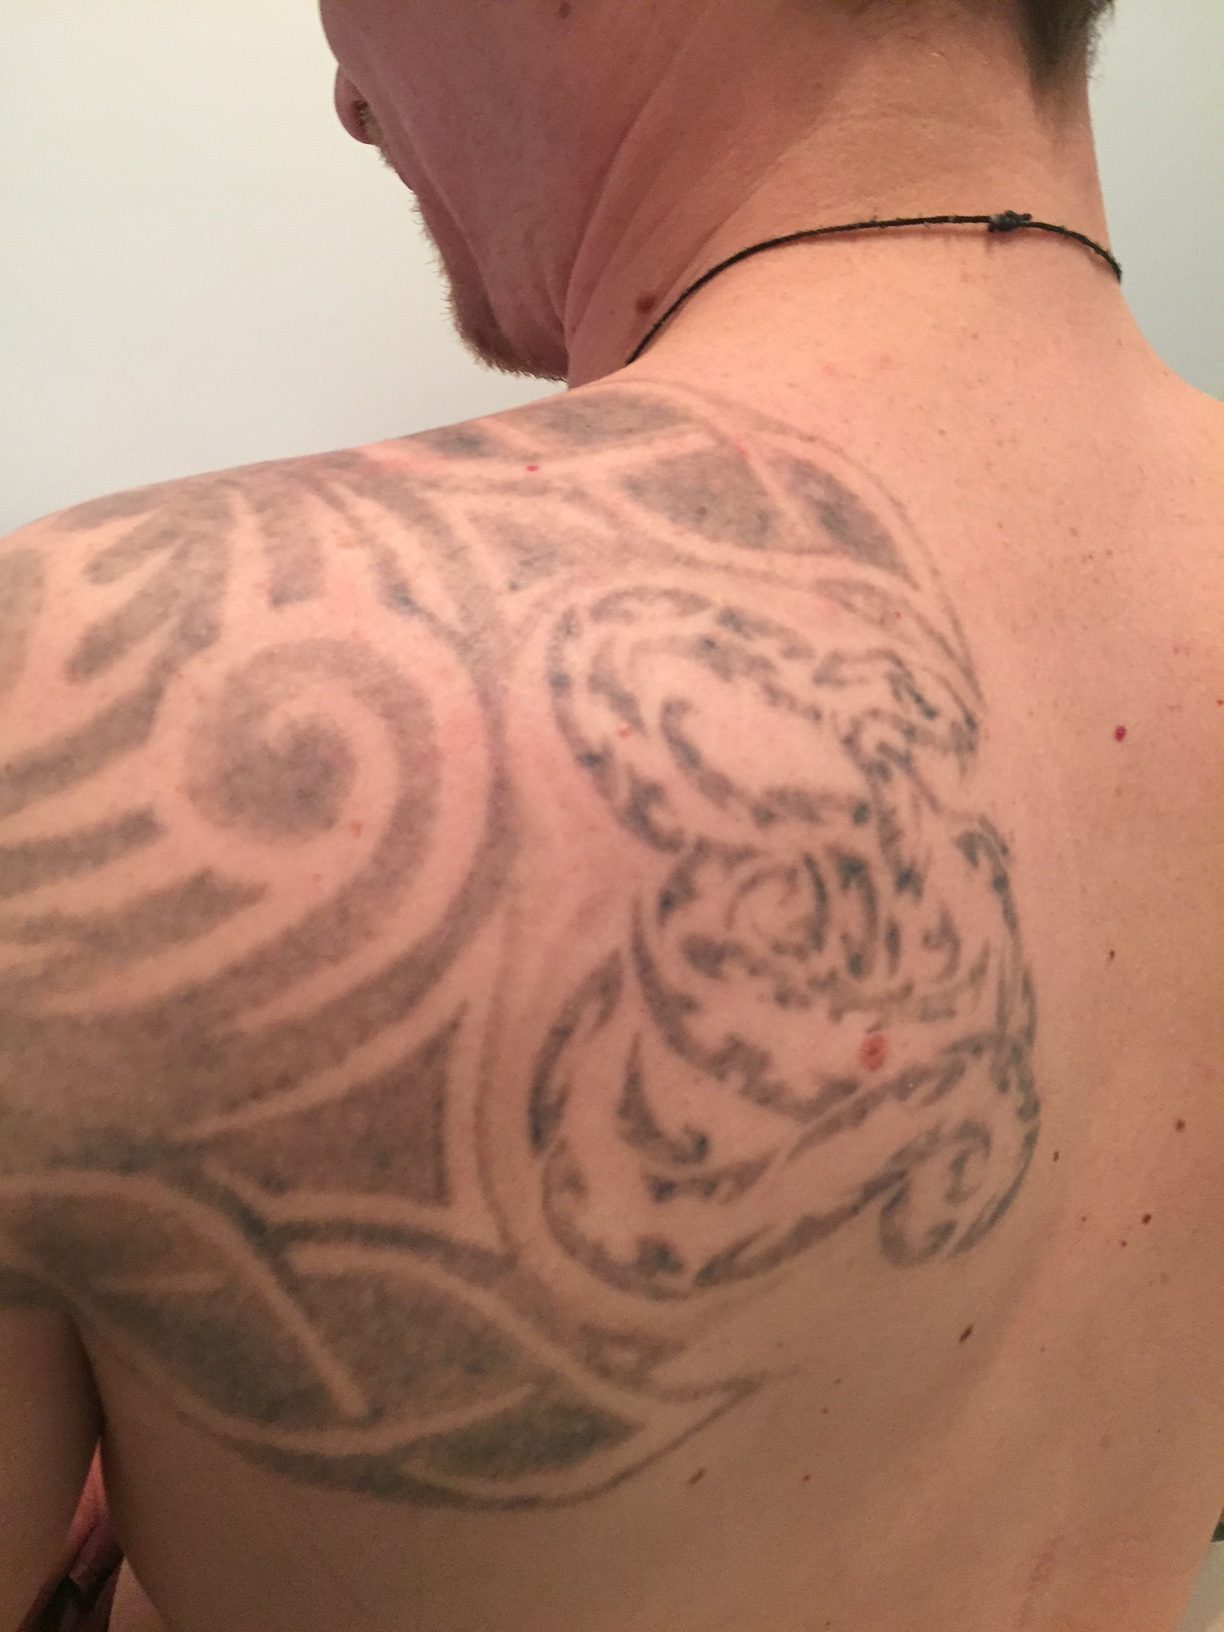 Laser Tattoo Removal - What you should be looking for. - restobod.com